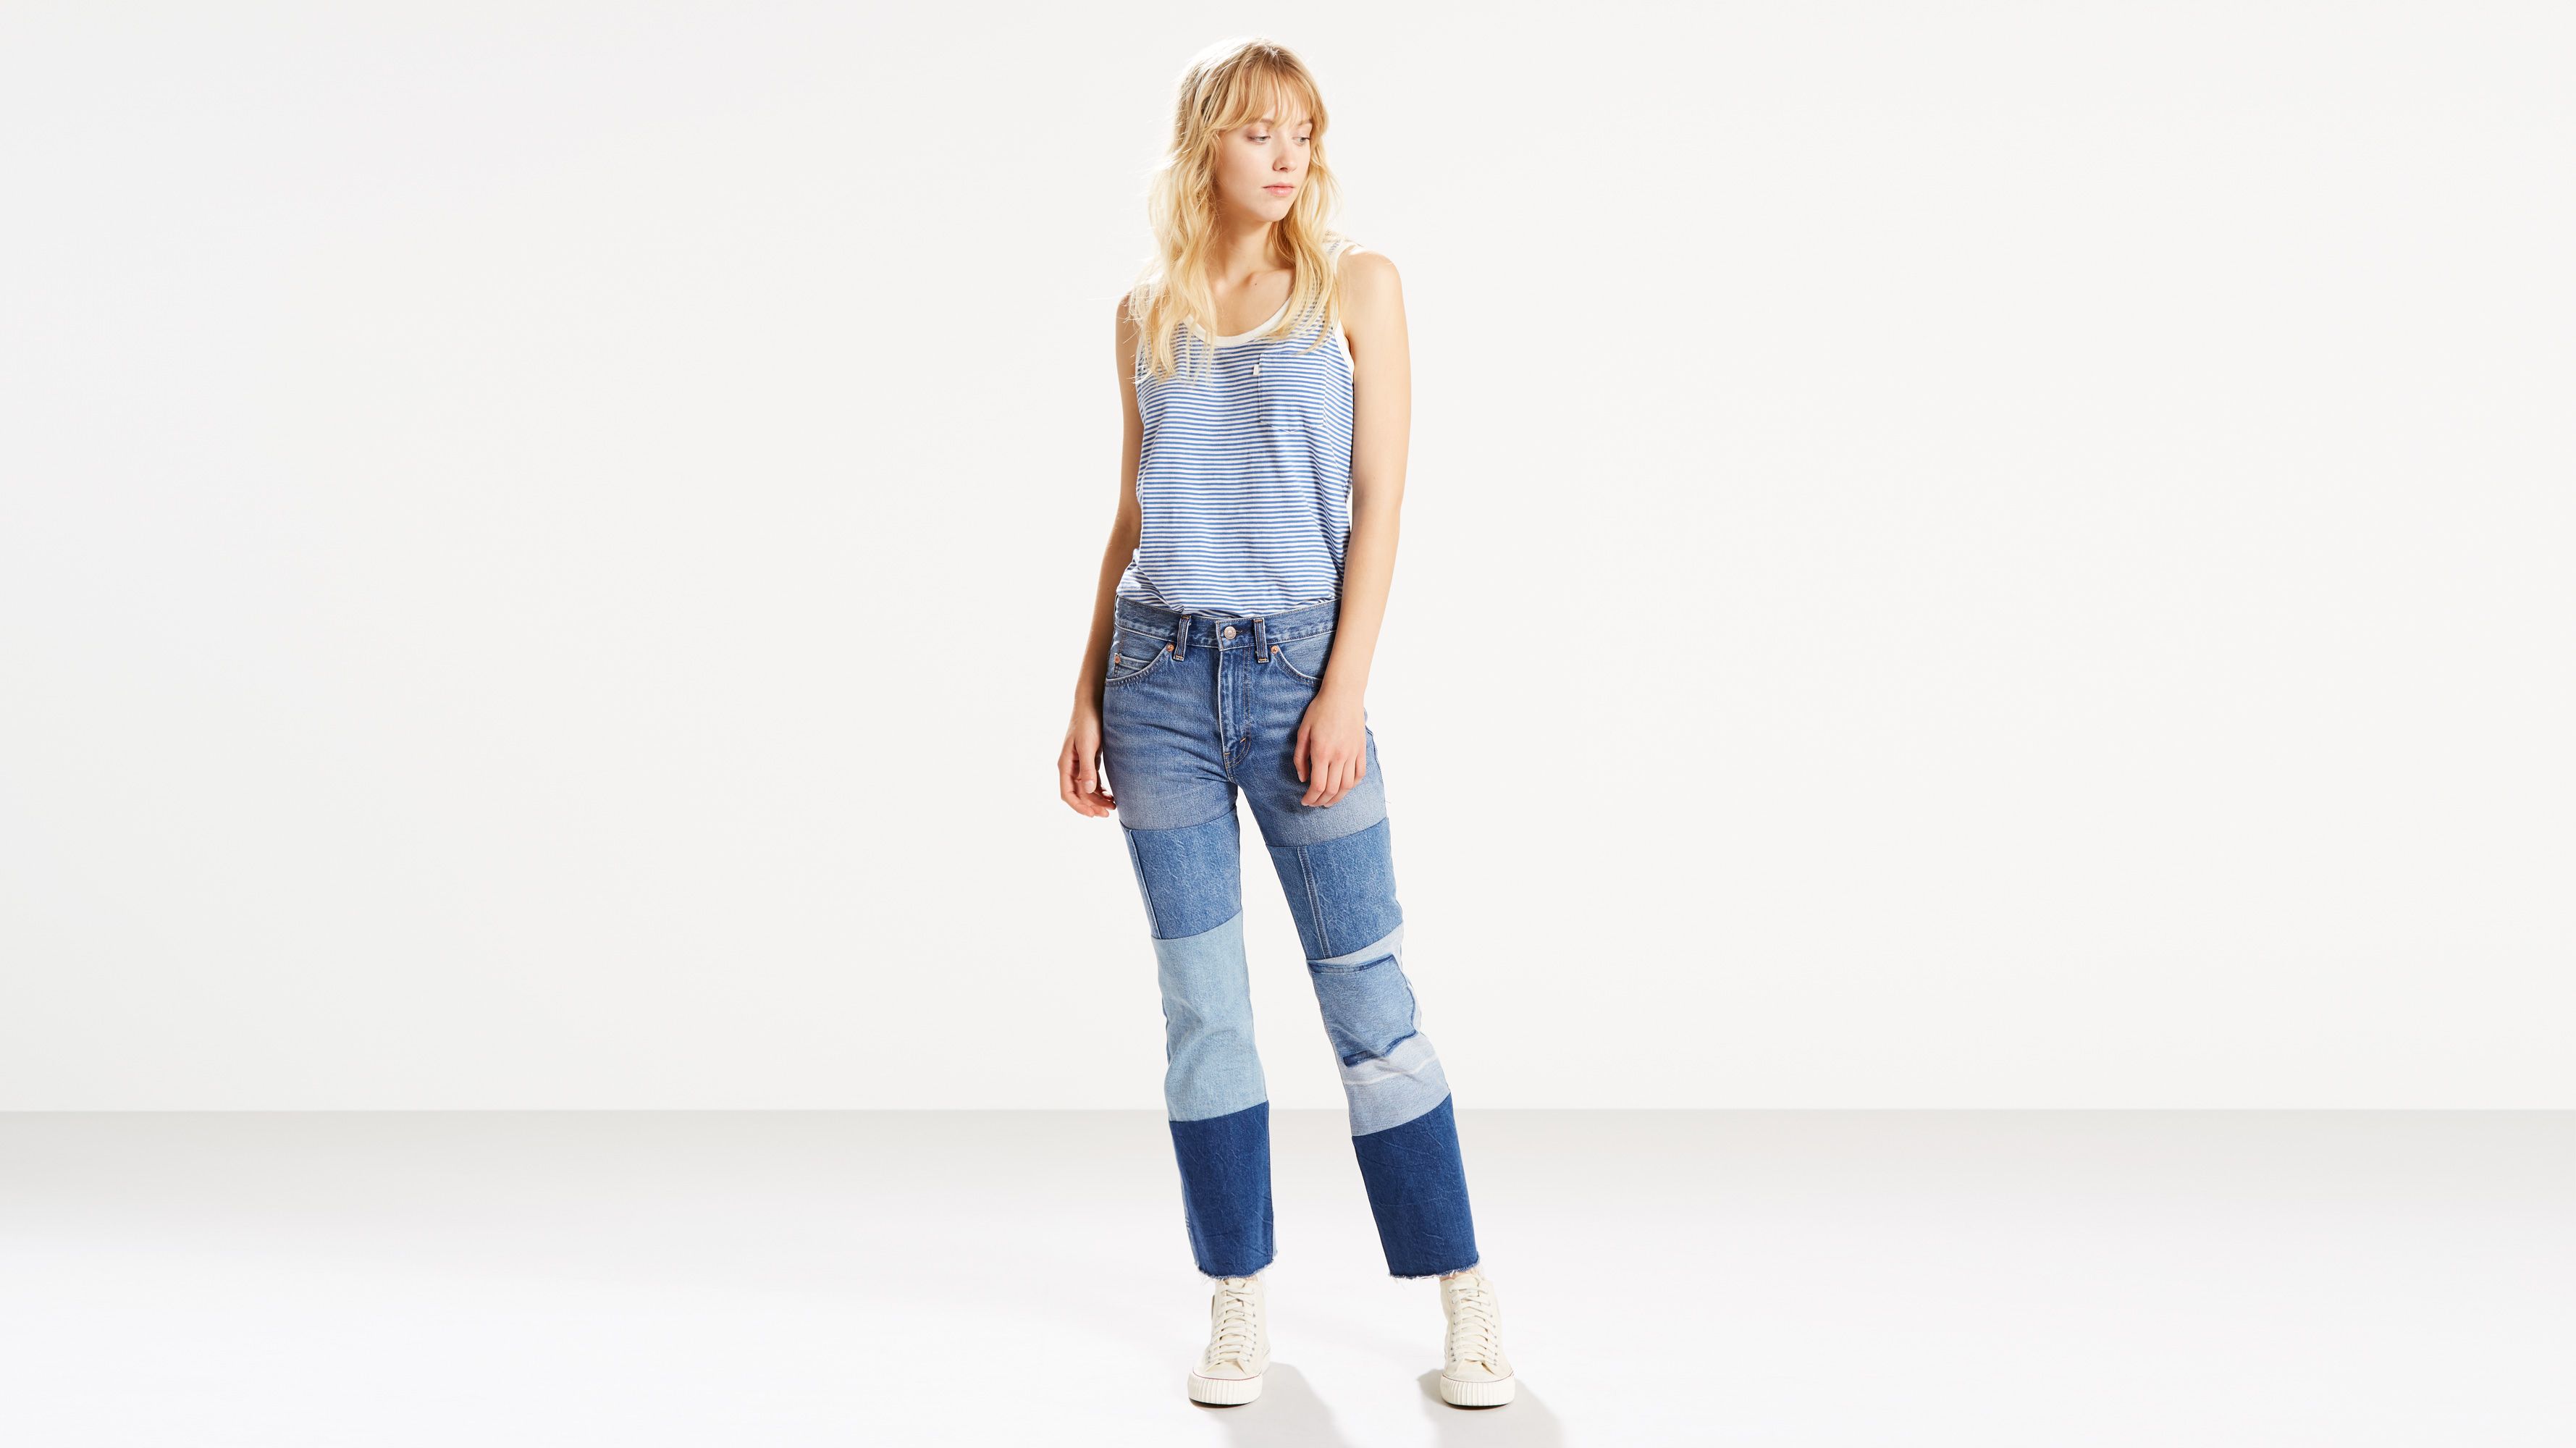 517 cropped boot cut jeans